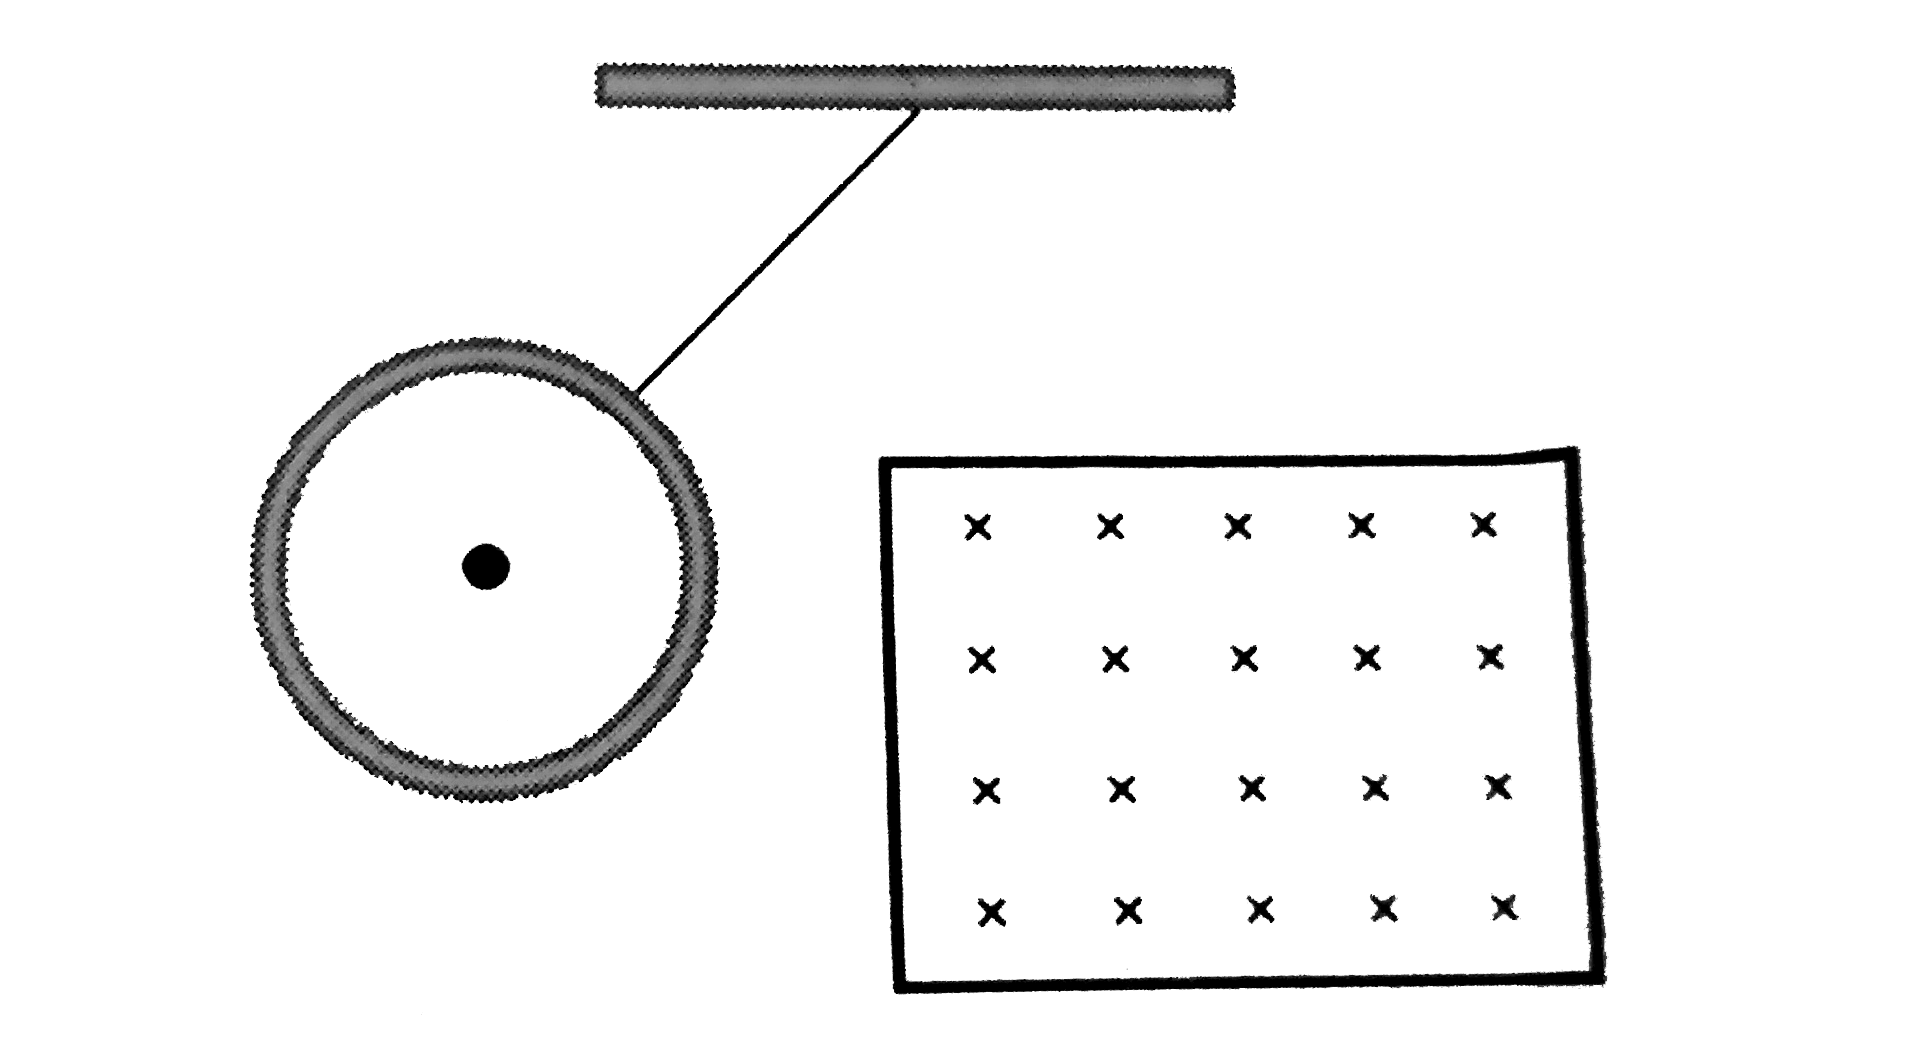 A metallic ring connected to a rod oscillates freely like a pendulum. If now a magnetic field is applied in horizontal direction so that the pendulum now swings through the field, the pendulum will